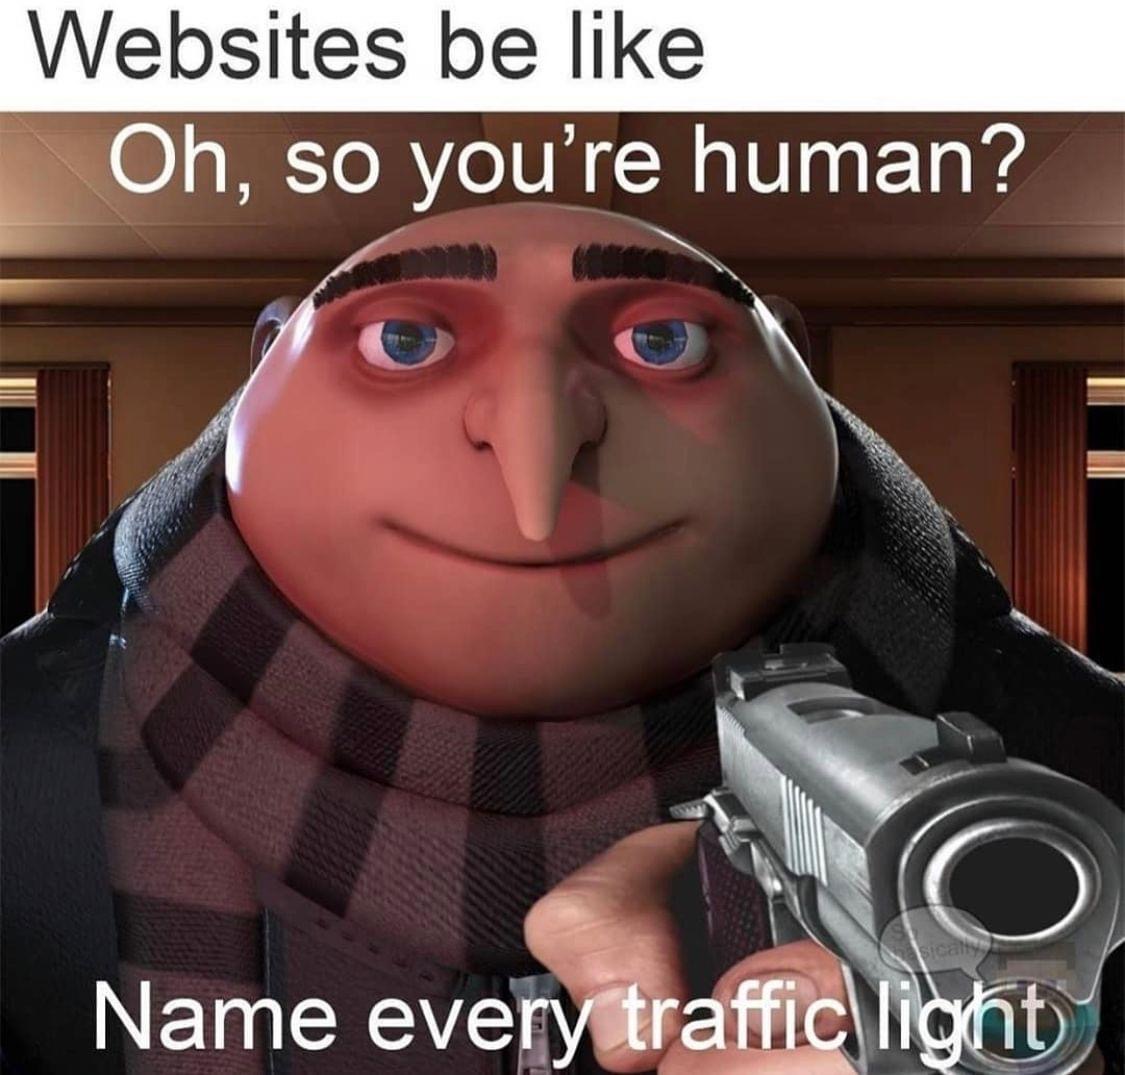 things are going to get grusome - Websites be Oh, so you're human? Name every traffic light